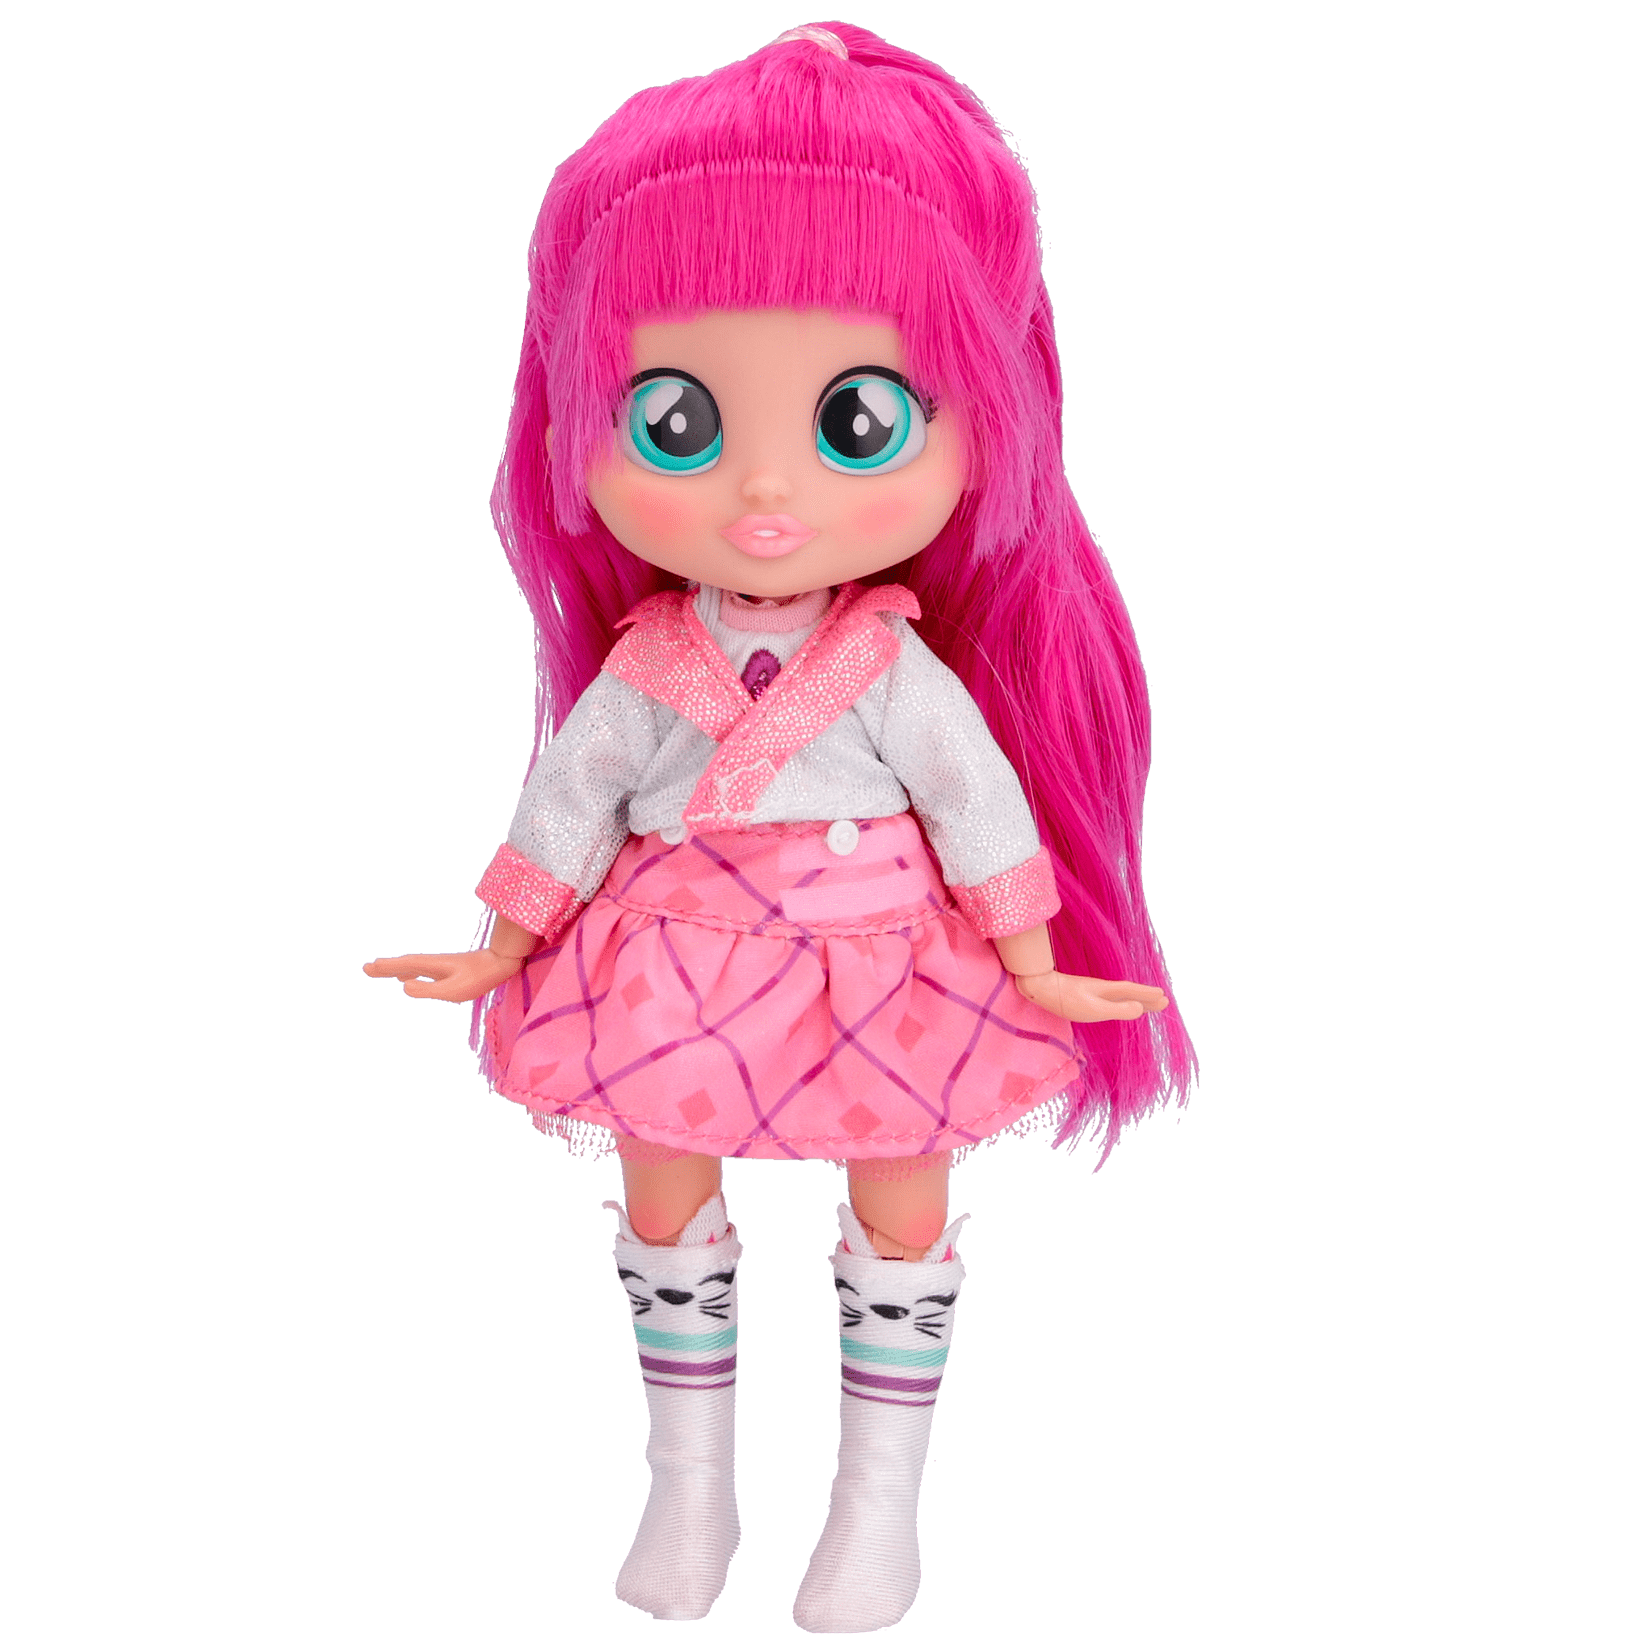 BFF by Cry Babies Daisy 8 in Fashion Doll with 9+ Surprises - Ages 4 and Up